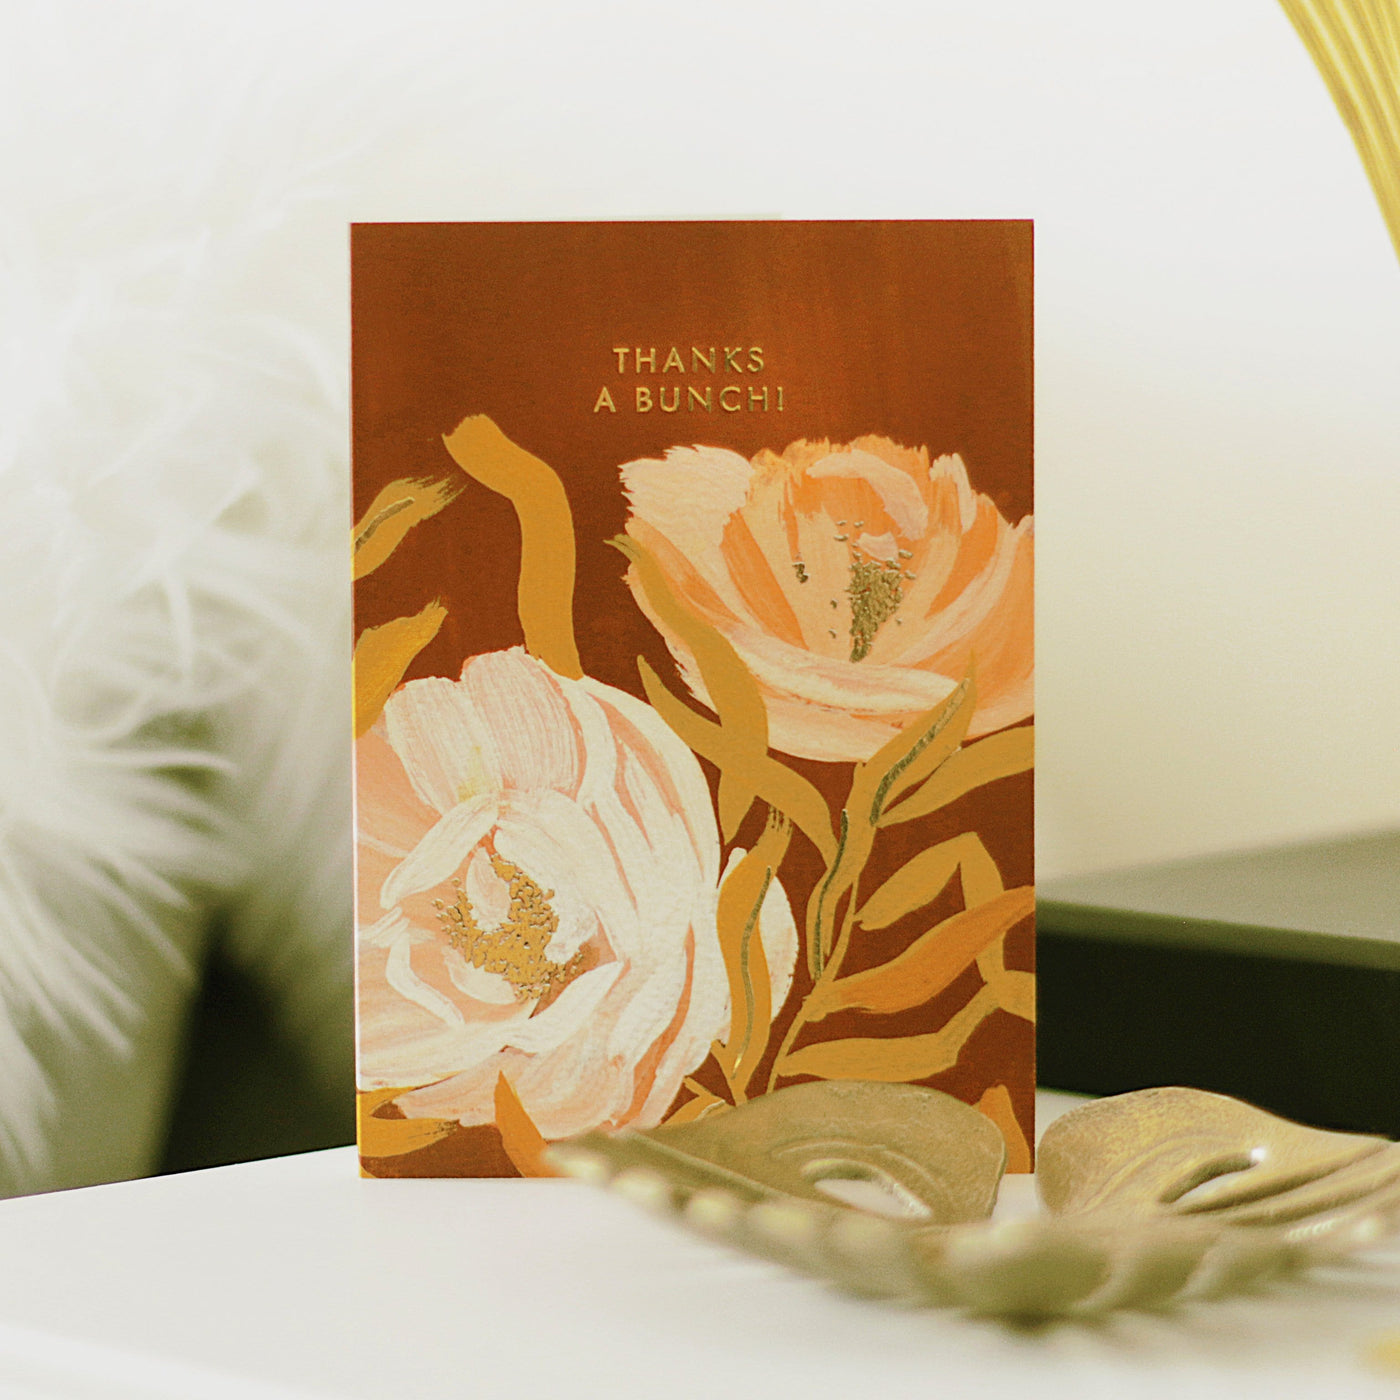 Illustrated Rich Red Floral Card With White Pink And Yellow Flowers And Gold Thanks A Bunch Lettering - Annie Dornan Smith